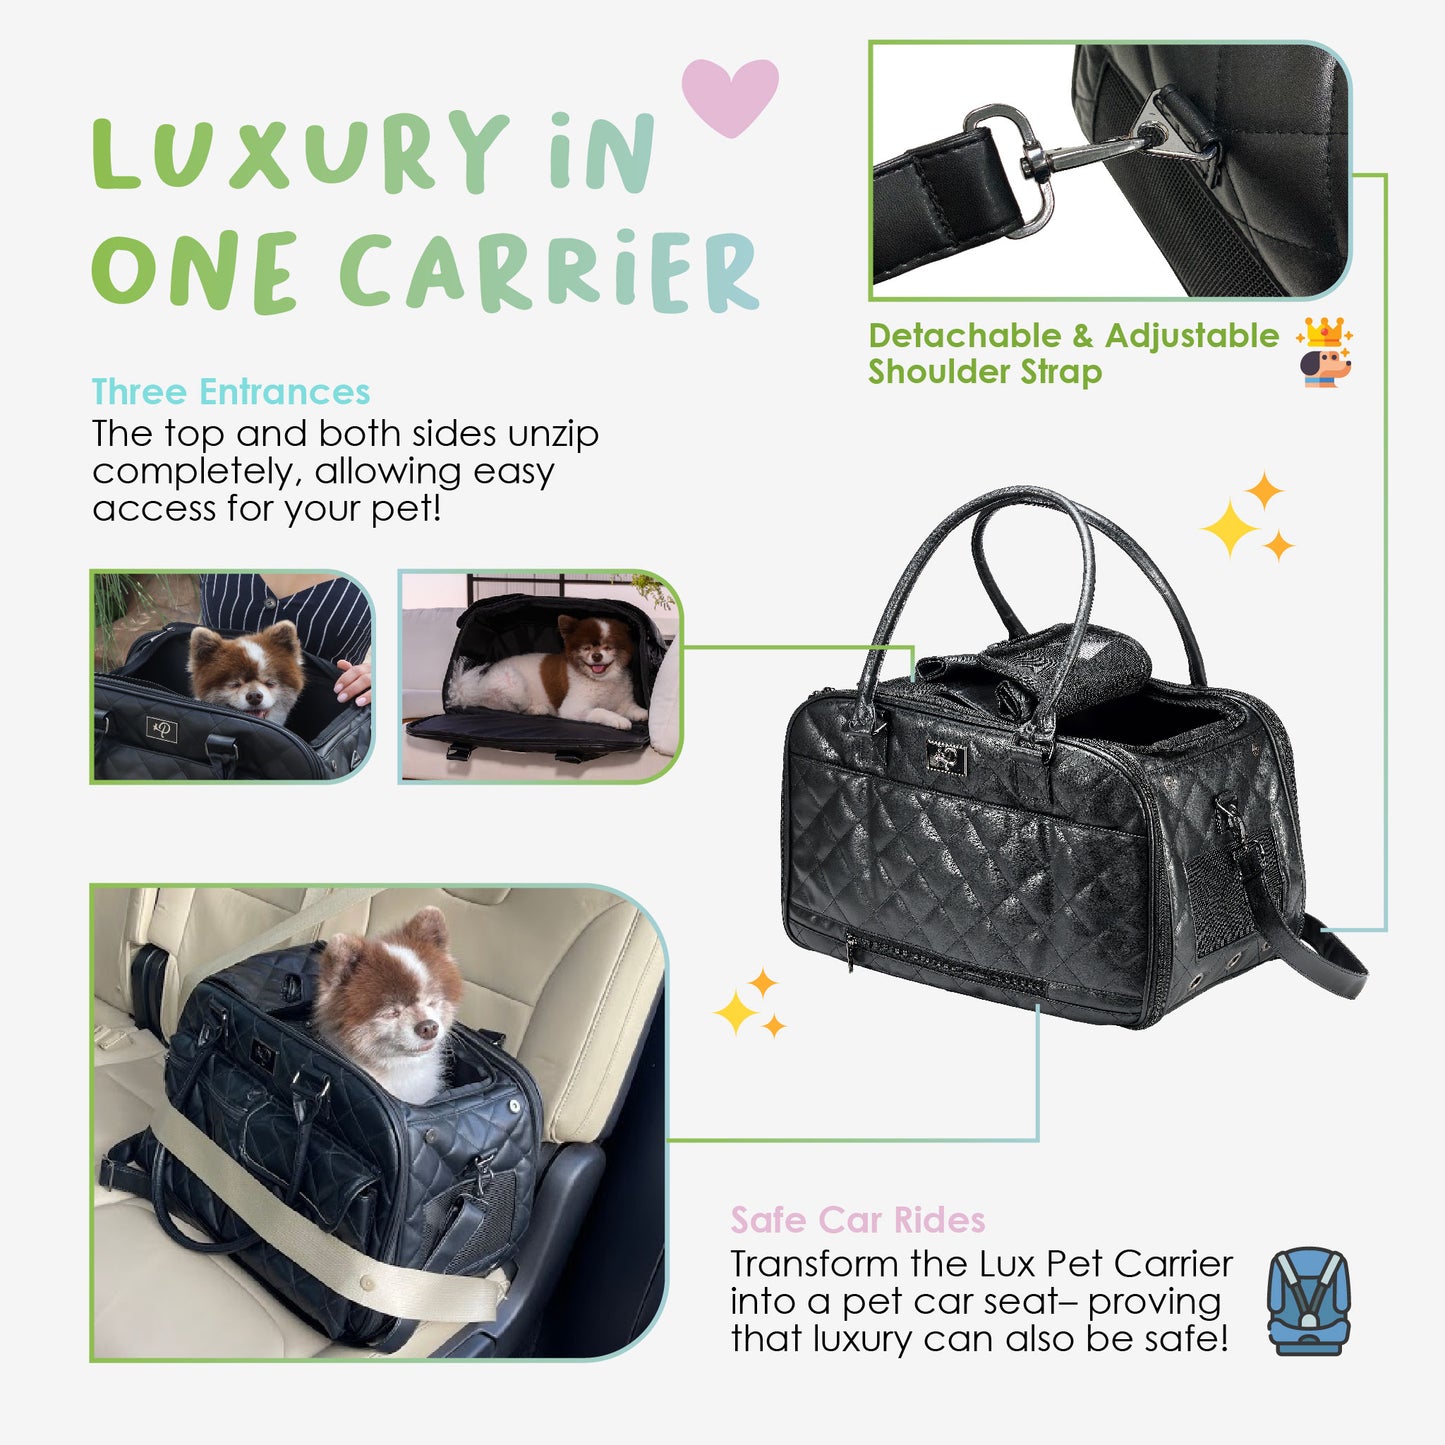 luxurious pet carrier in black